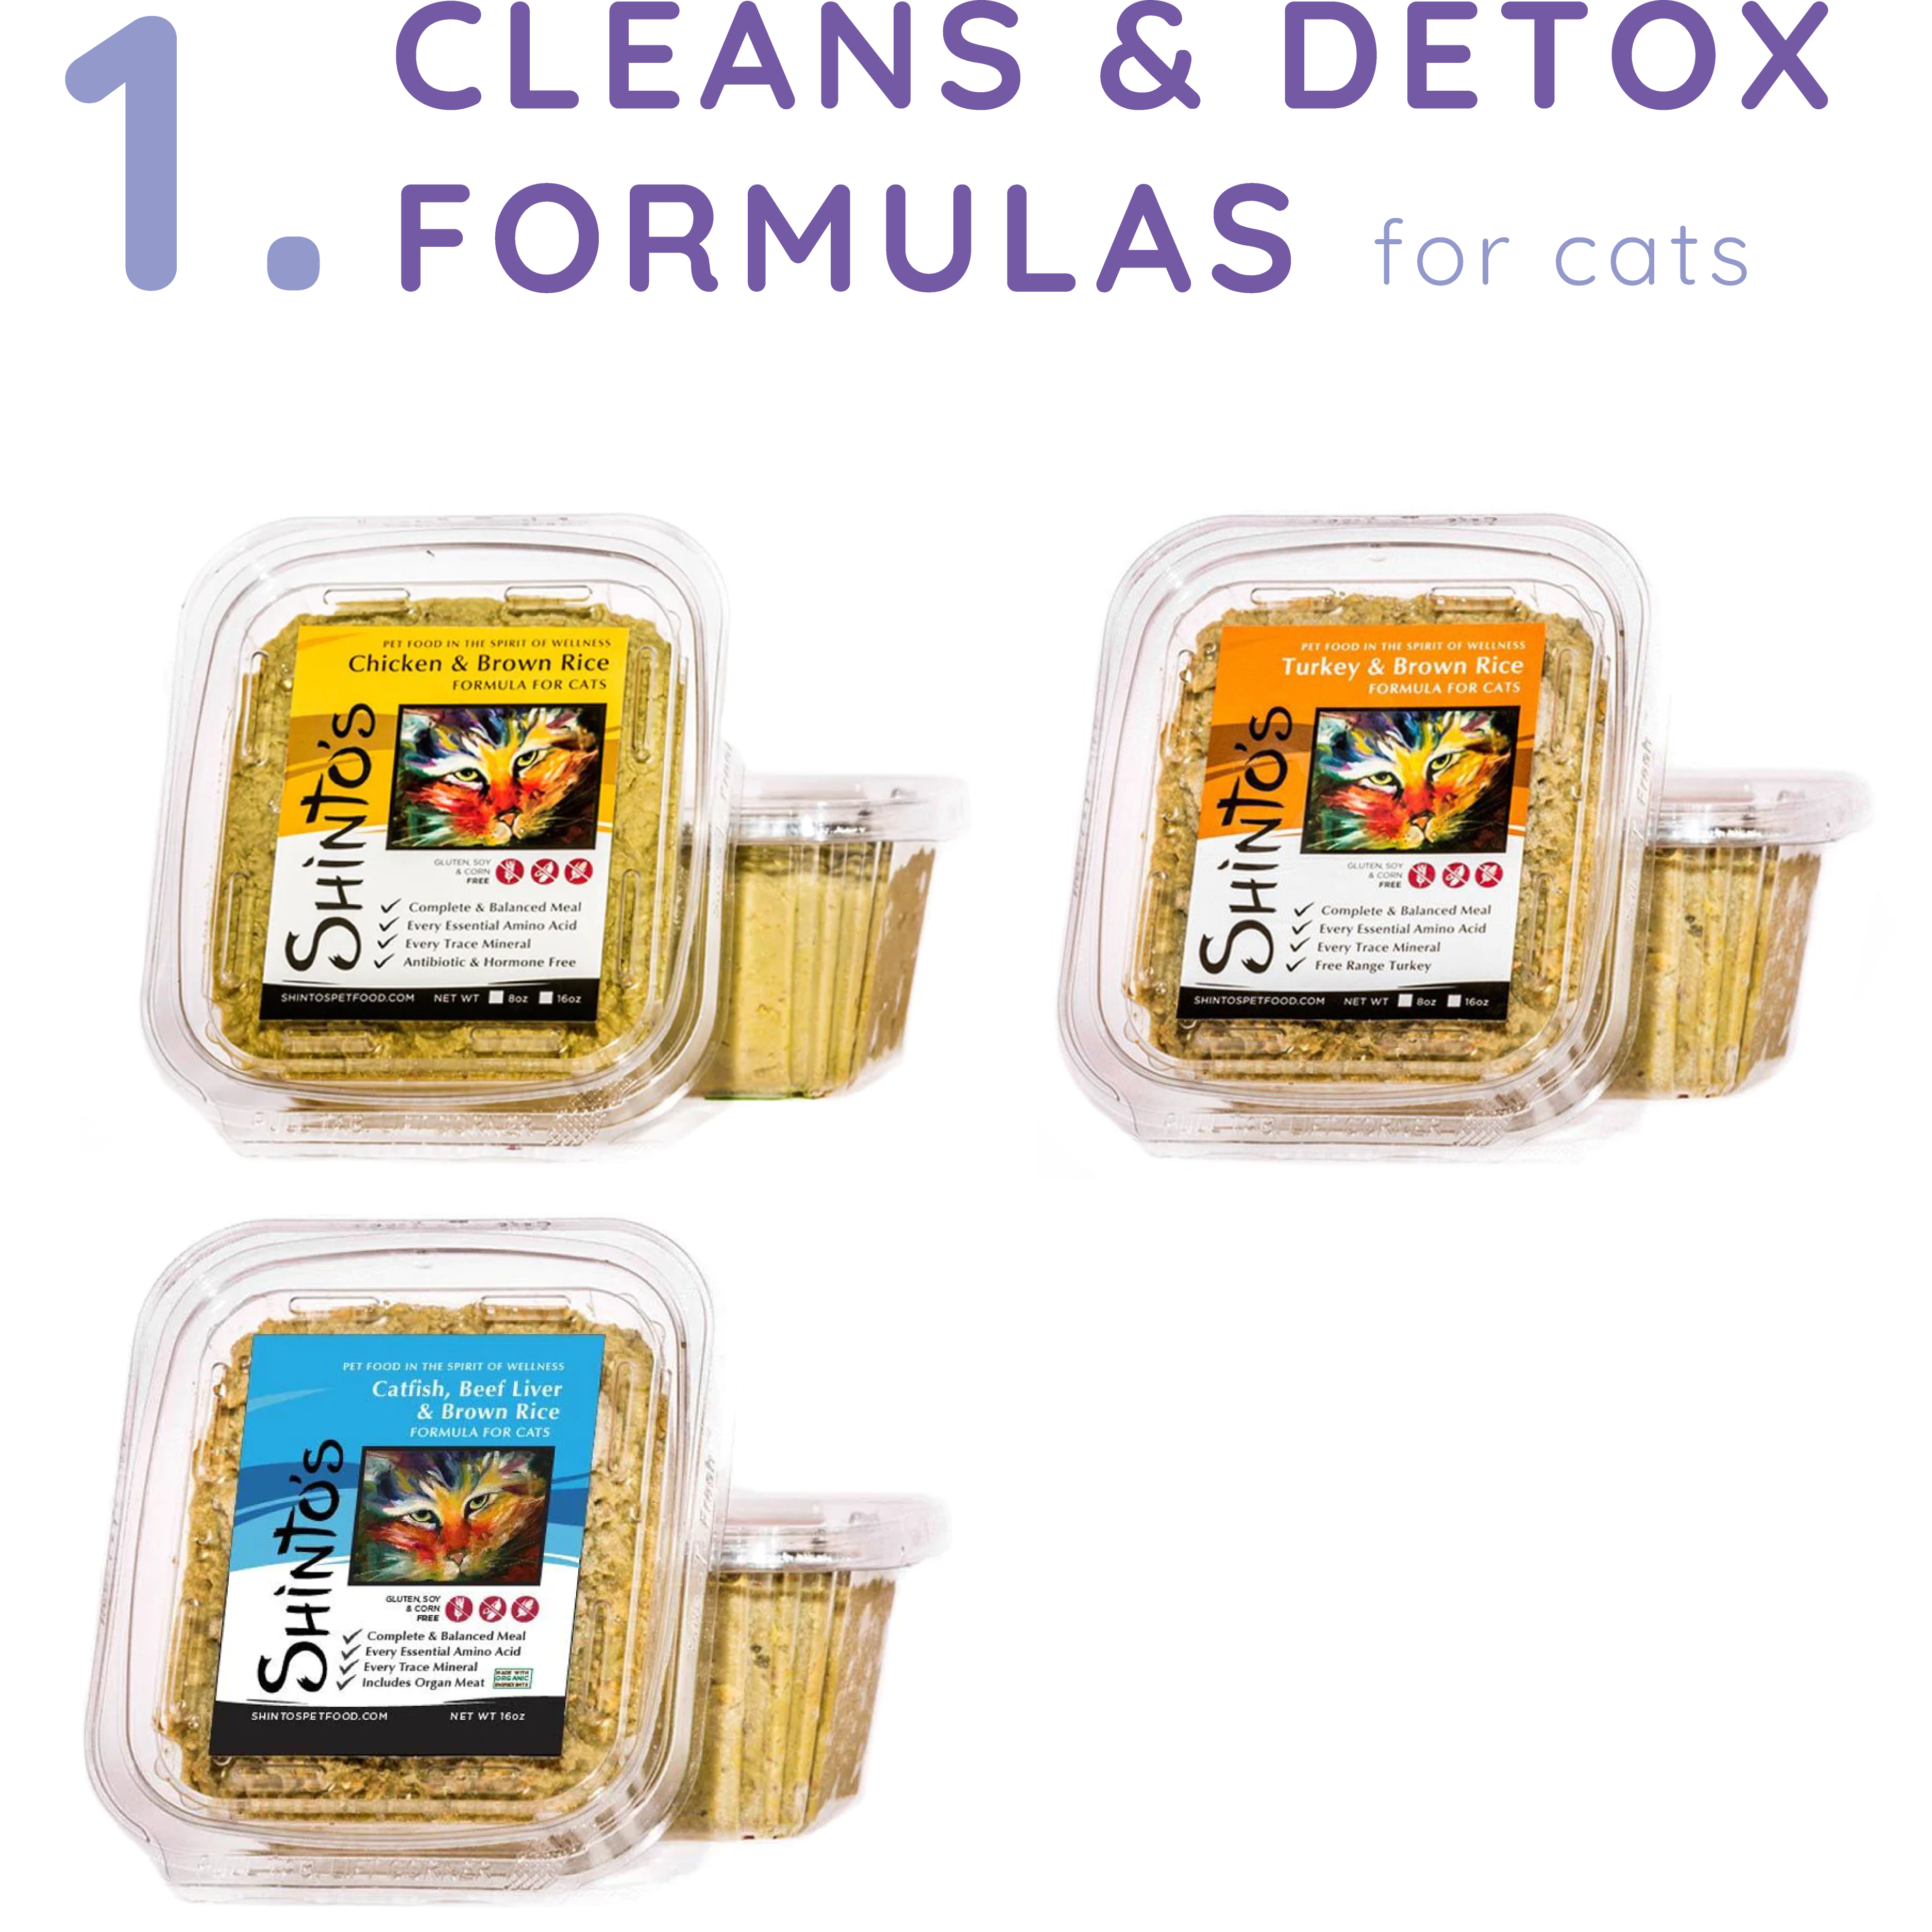 01 - Cleaning & Detoxing Formulas for Cats - 16 oz. (3 pack)